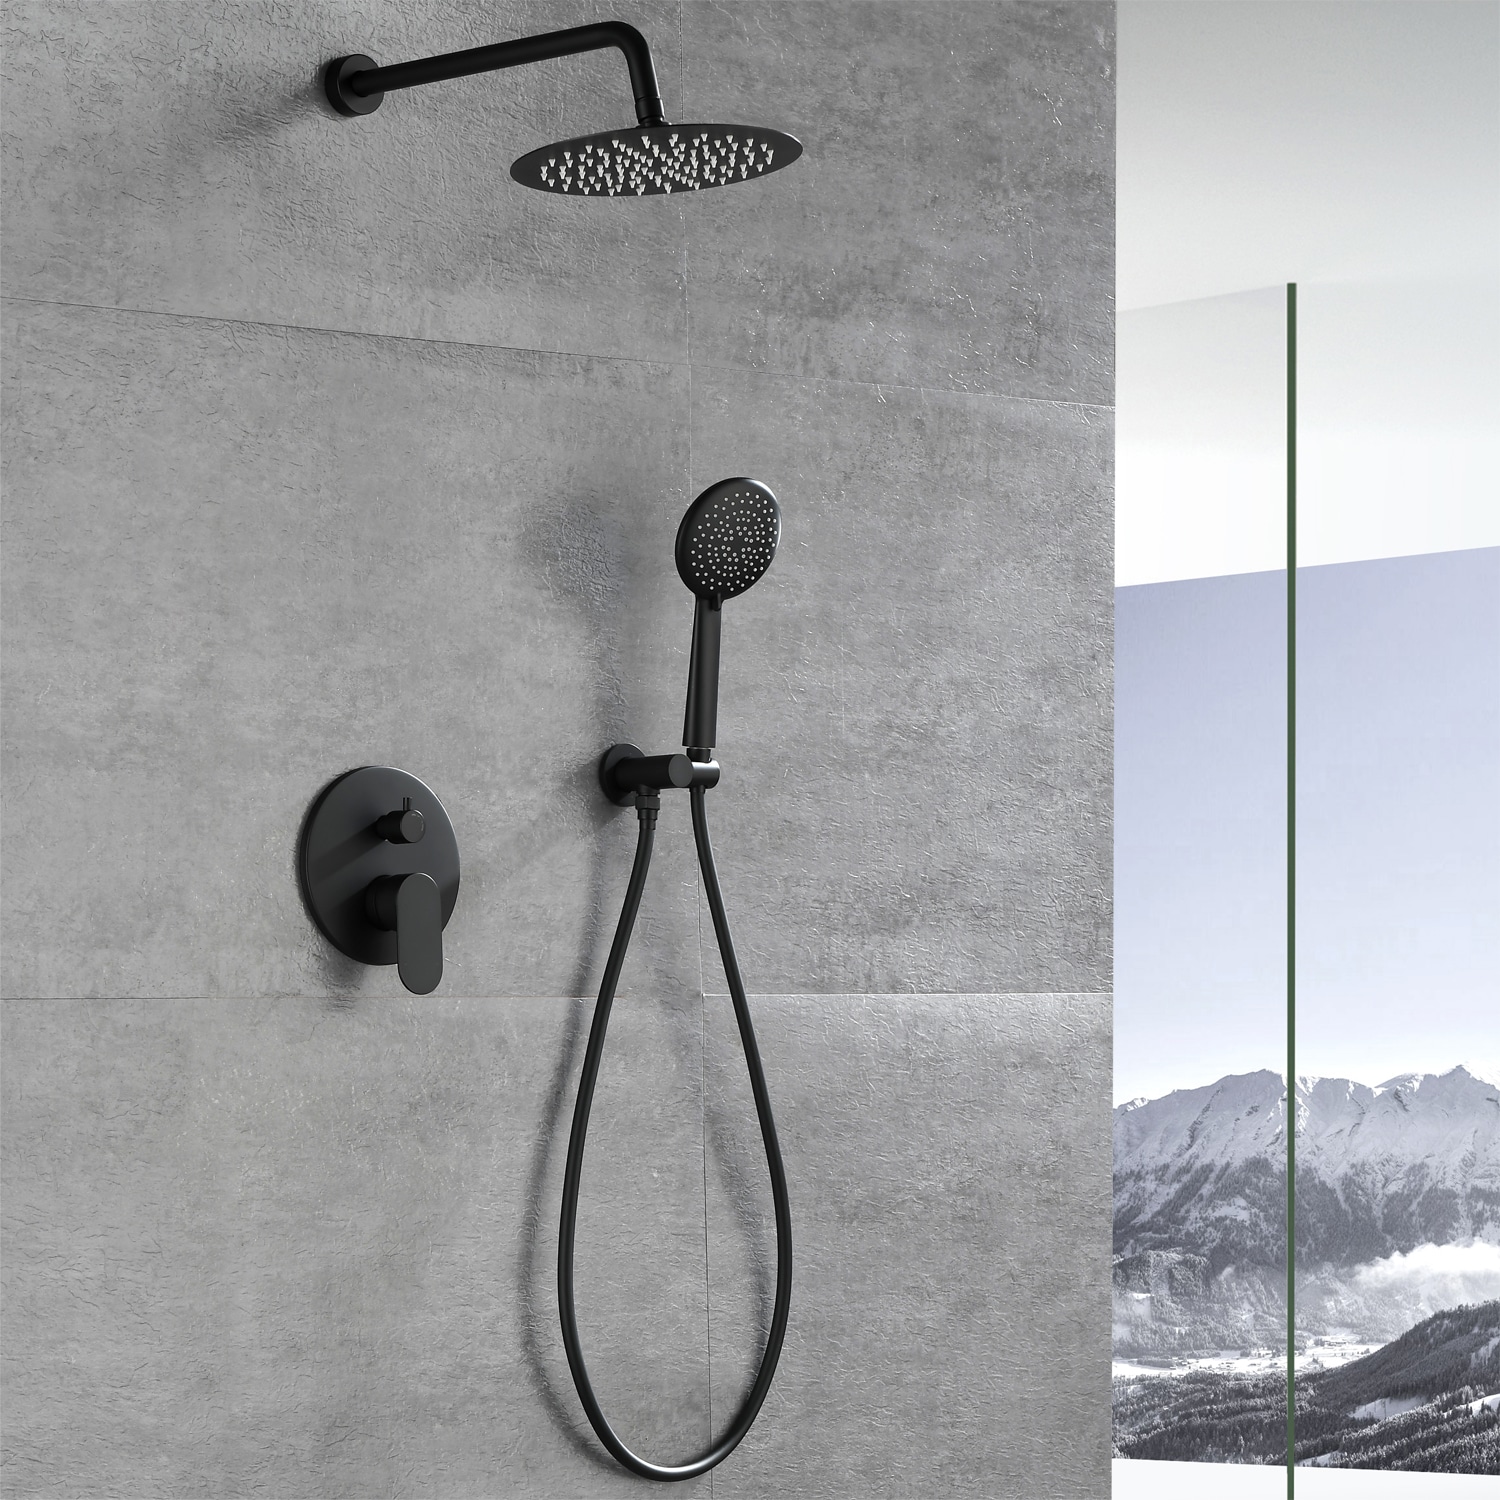 Pouuin Ob Matte Black Waterfall Built-In Shower Faucet System with 2-way Diverter Valve Included